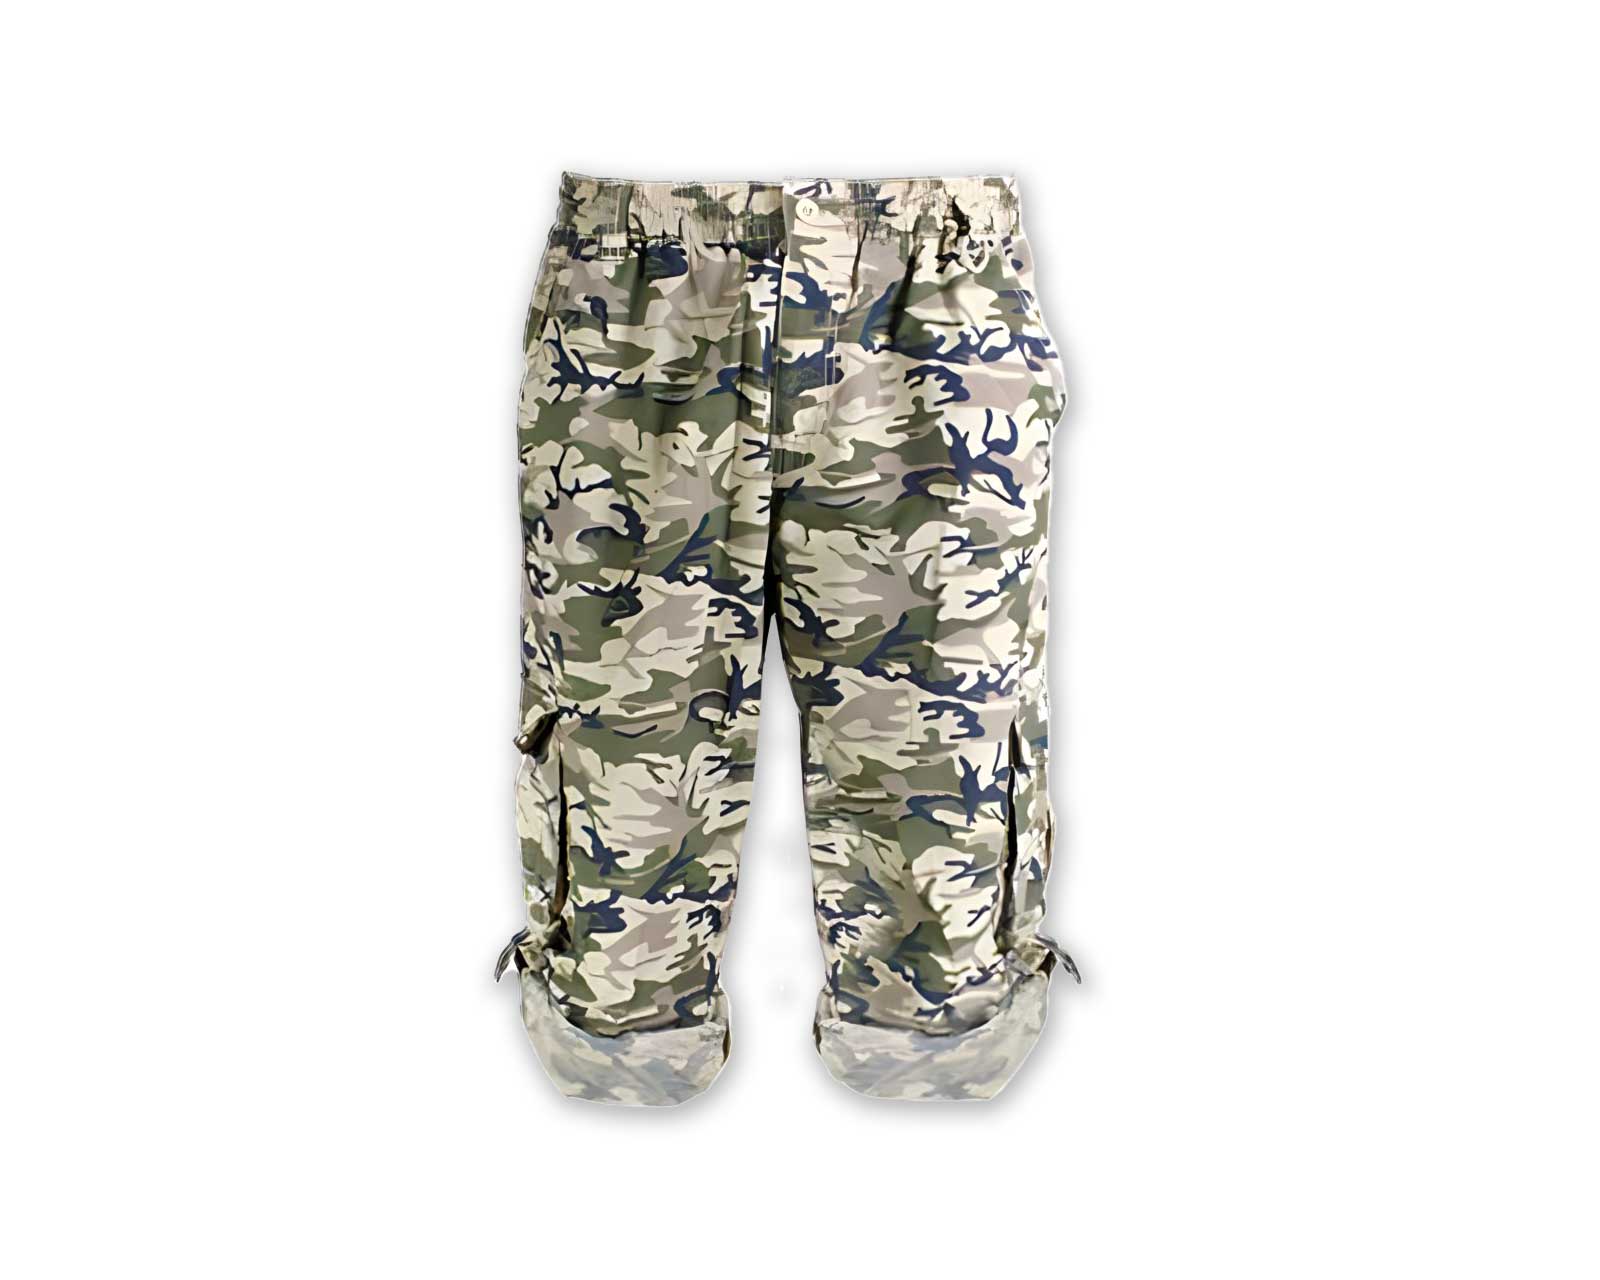 Camo Pants - Can be worn as shorts in hot weather.